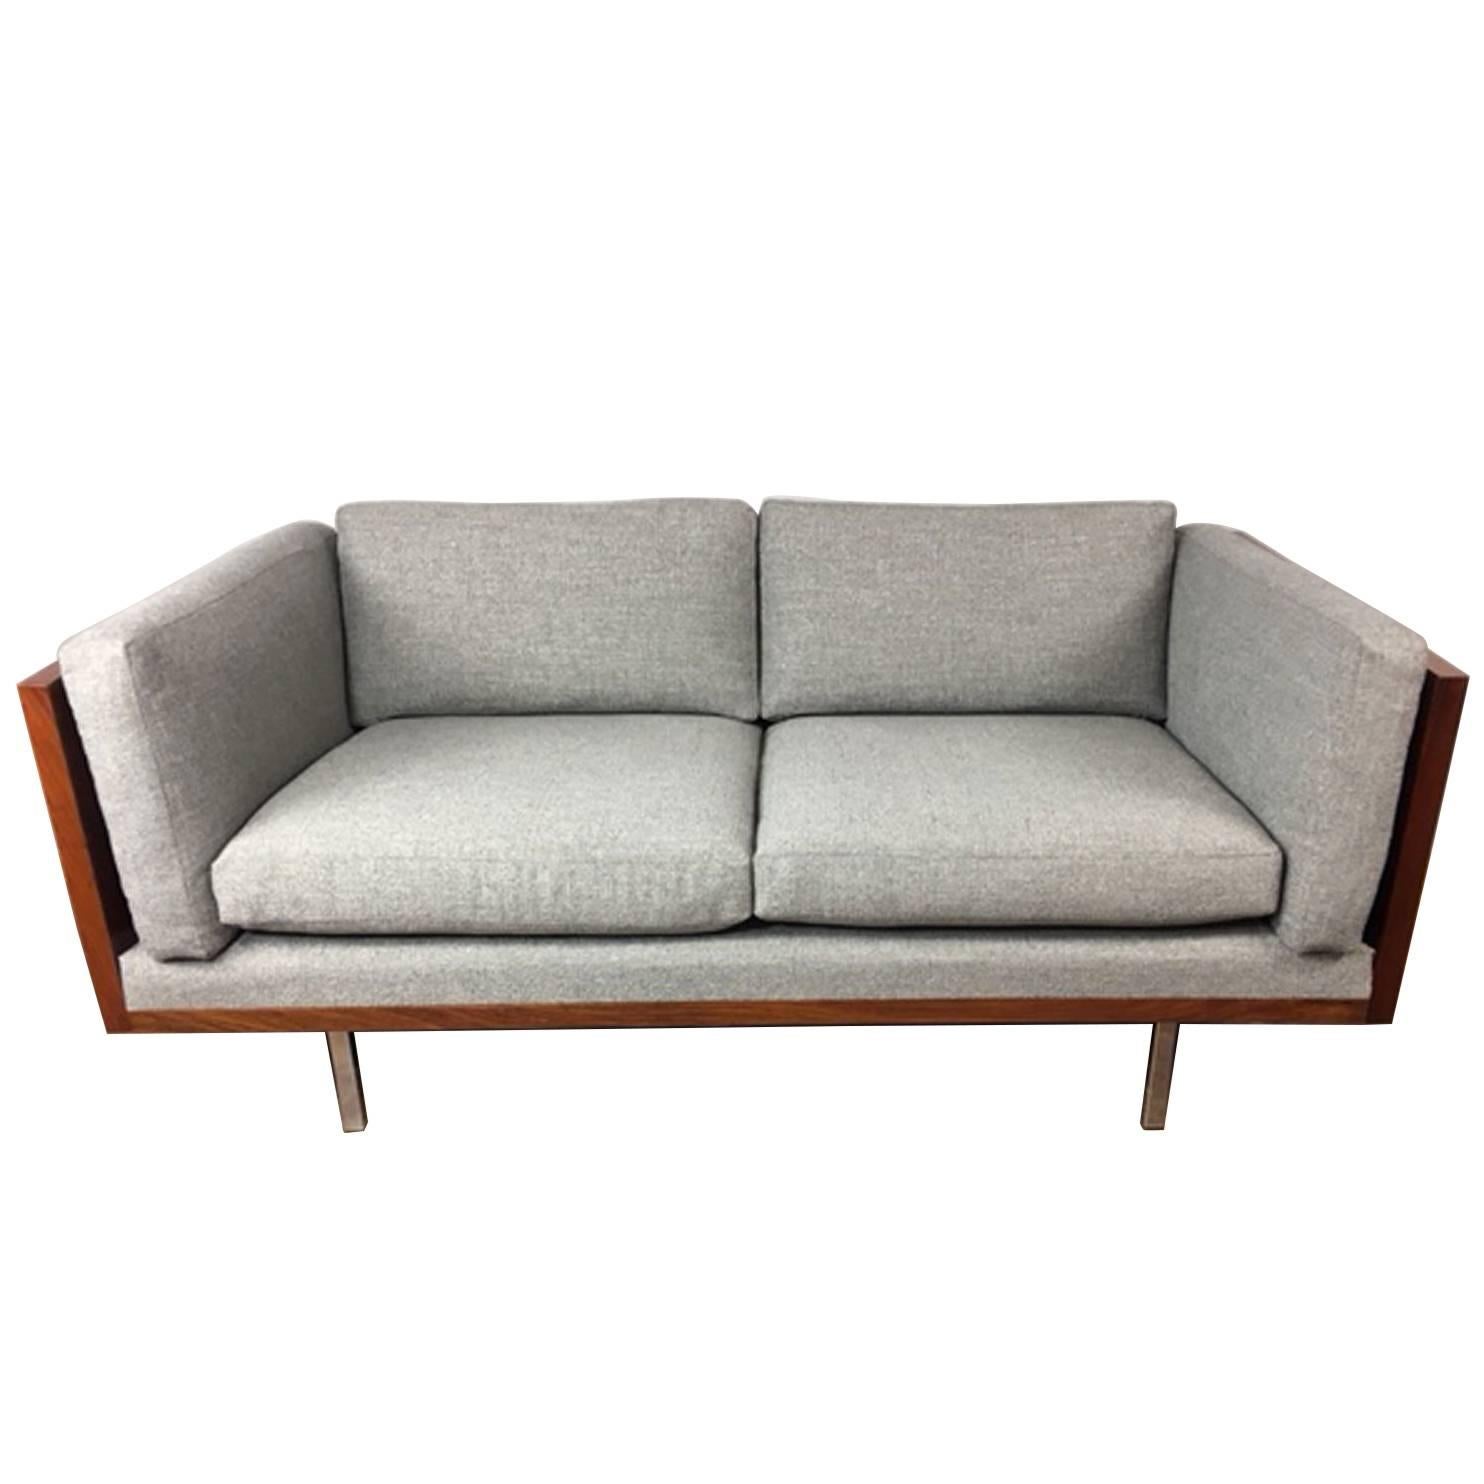 Rosewood Wrapped Low Back Loveseat by Komfort